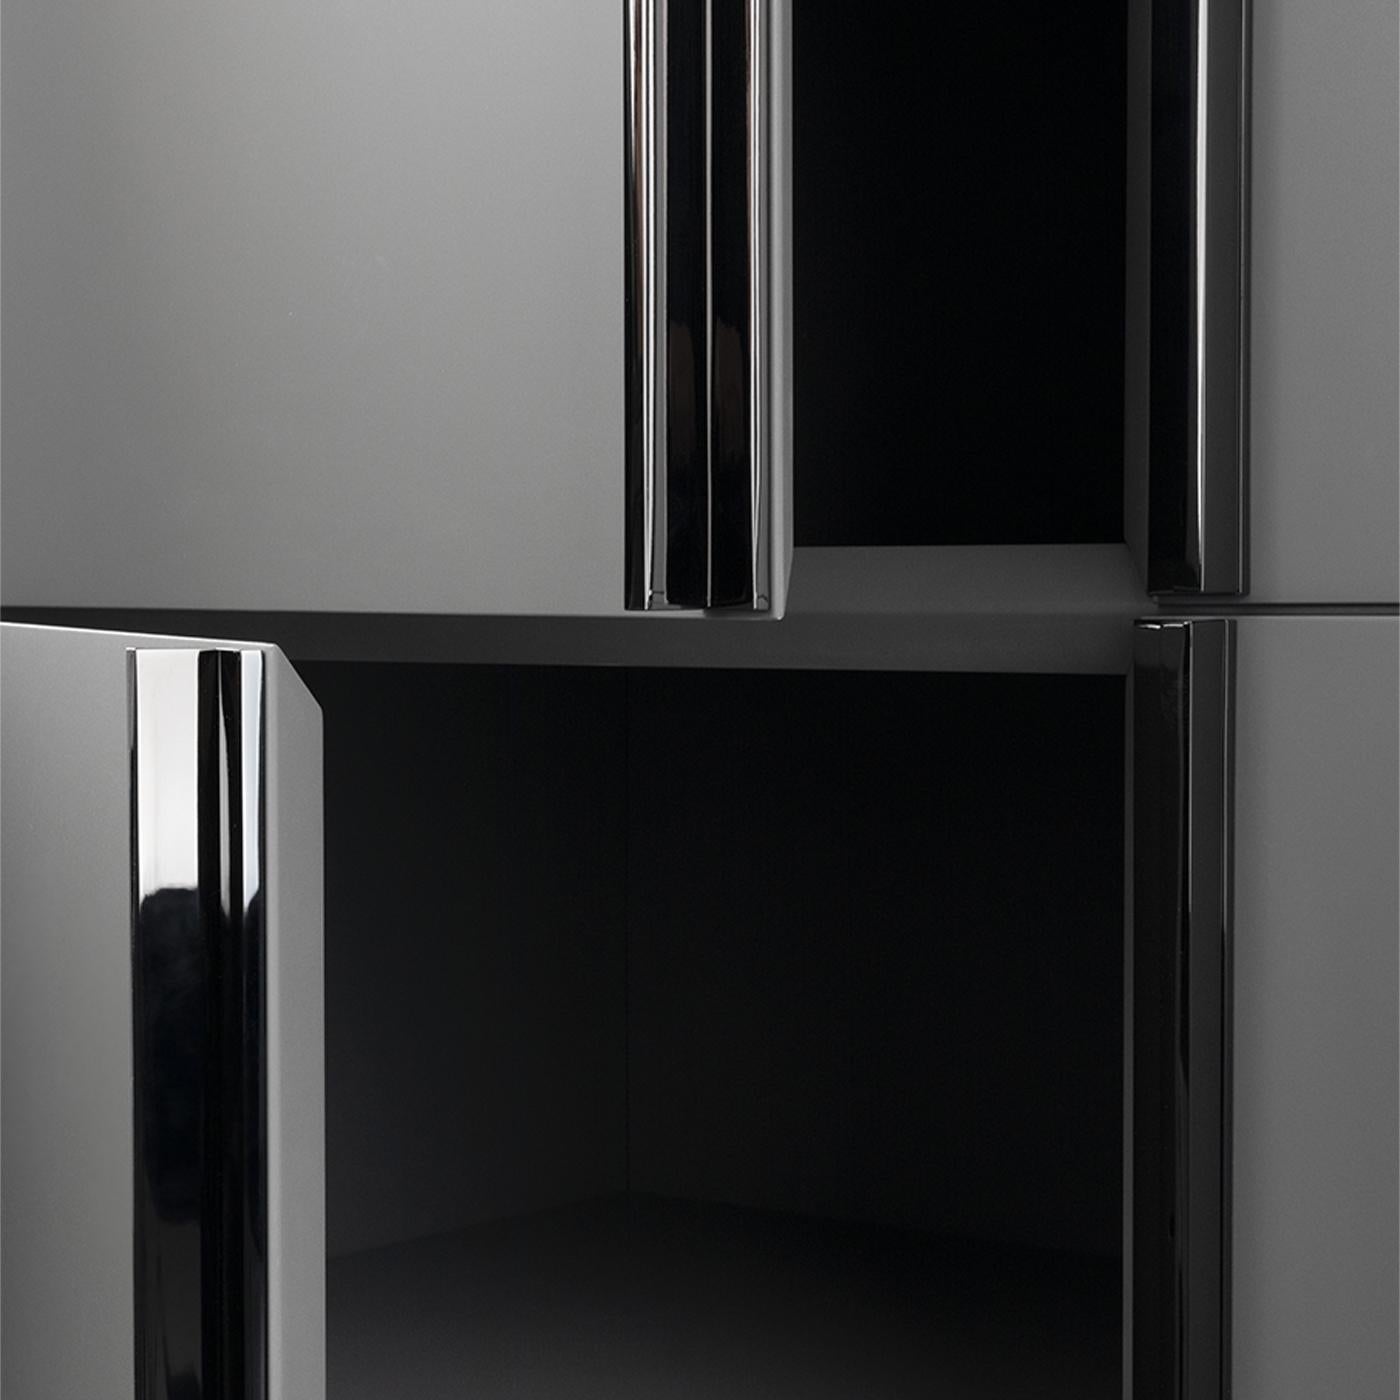 Elegant in its rigorous lines and matte dusty-gray lacquer, this cupboard makes for a precious addition to contemporary interiors. Black nickel is the glamorous finish selected for both the linear handles and crossing base elements, adding a